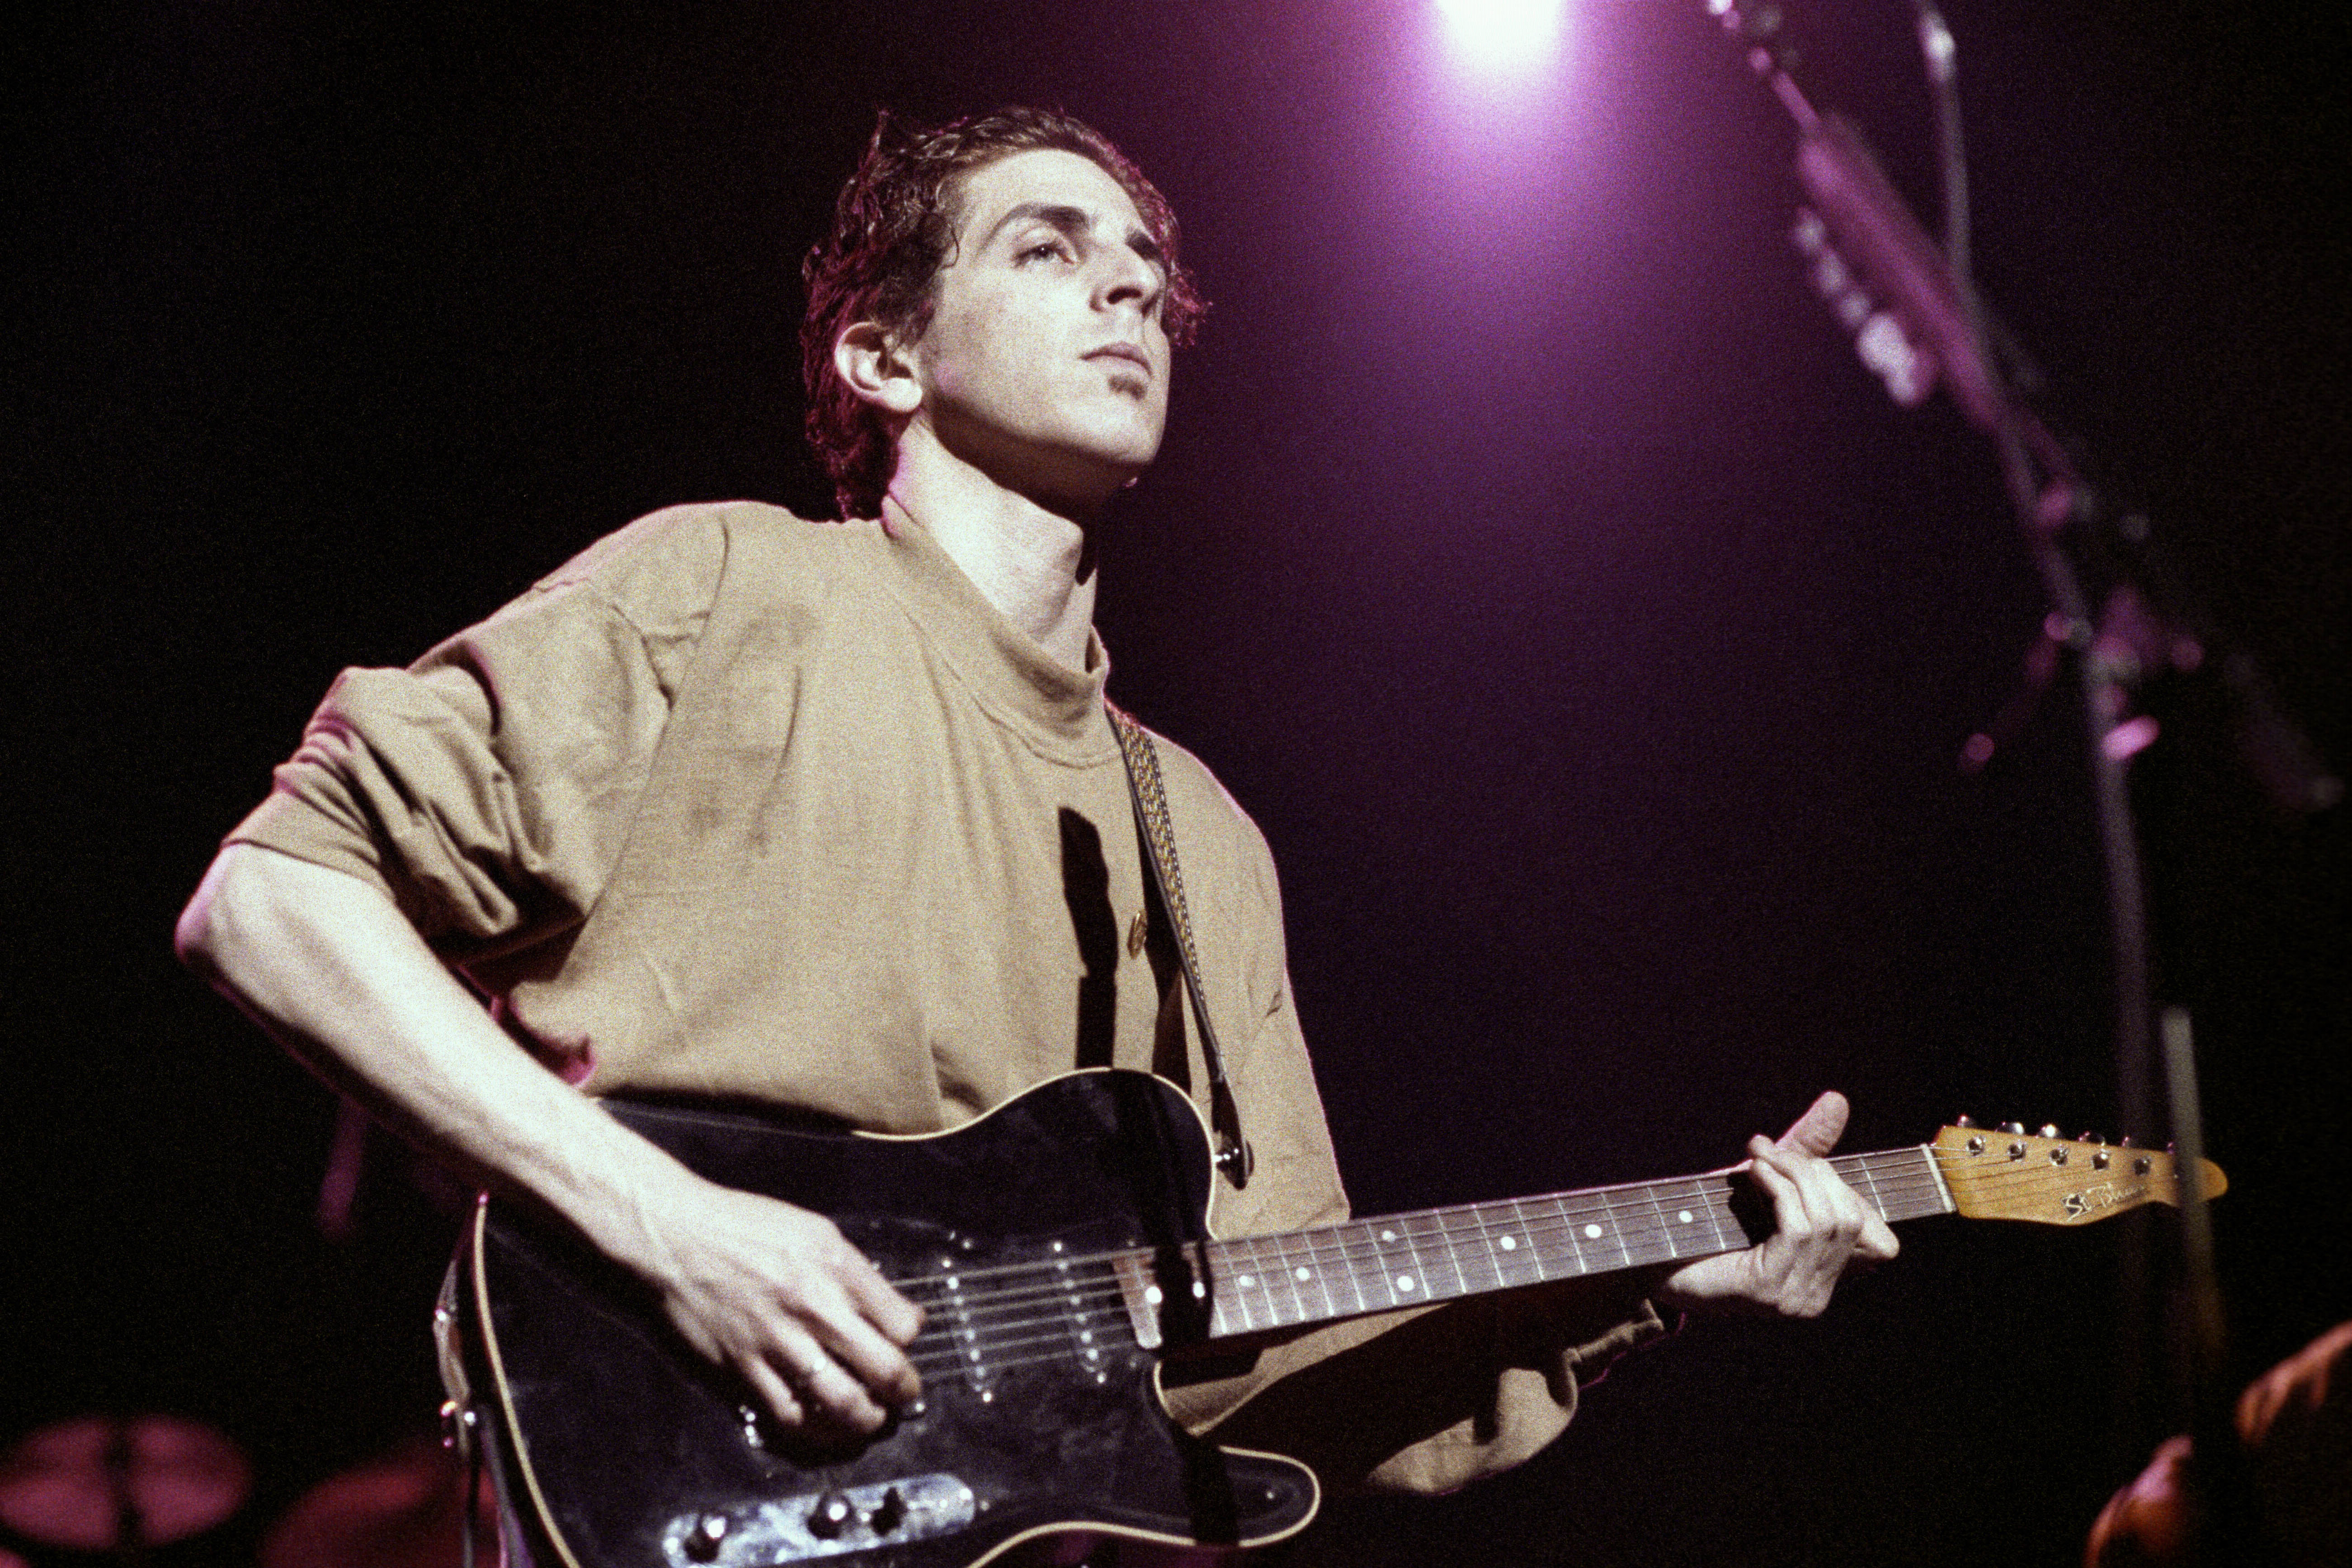 Michael Penn onstage playing the guitar